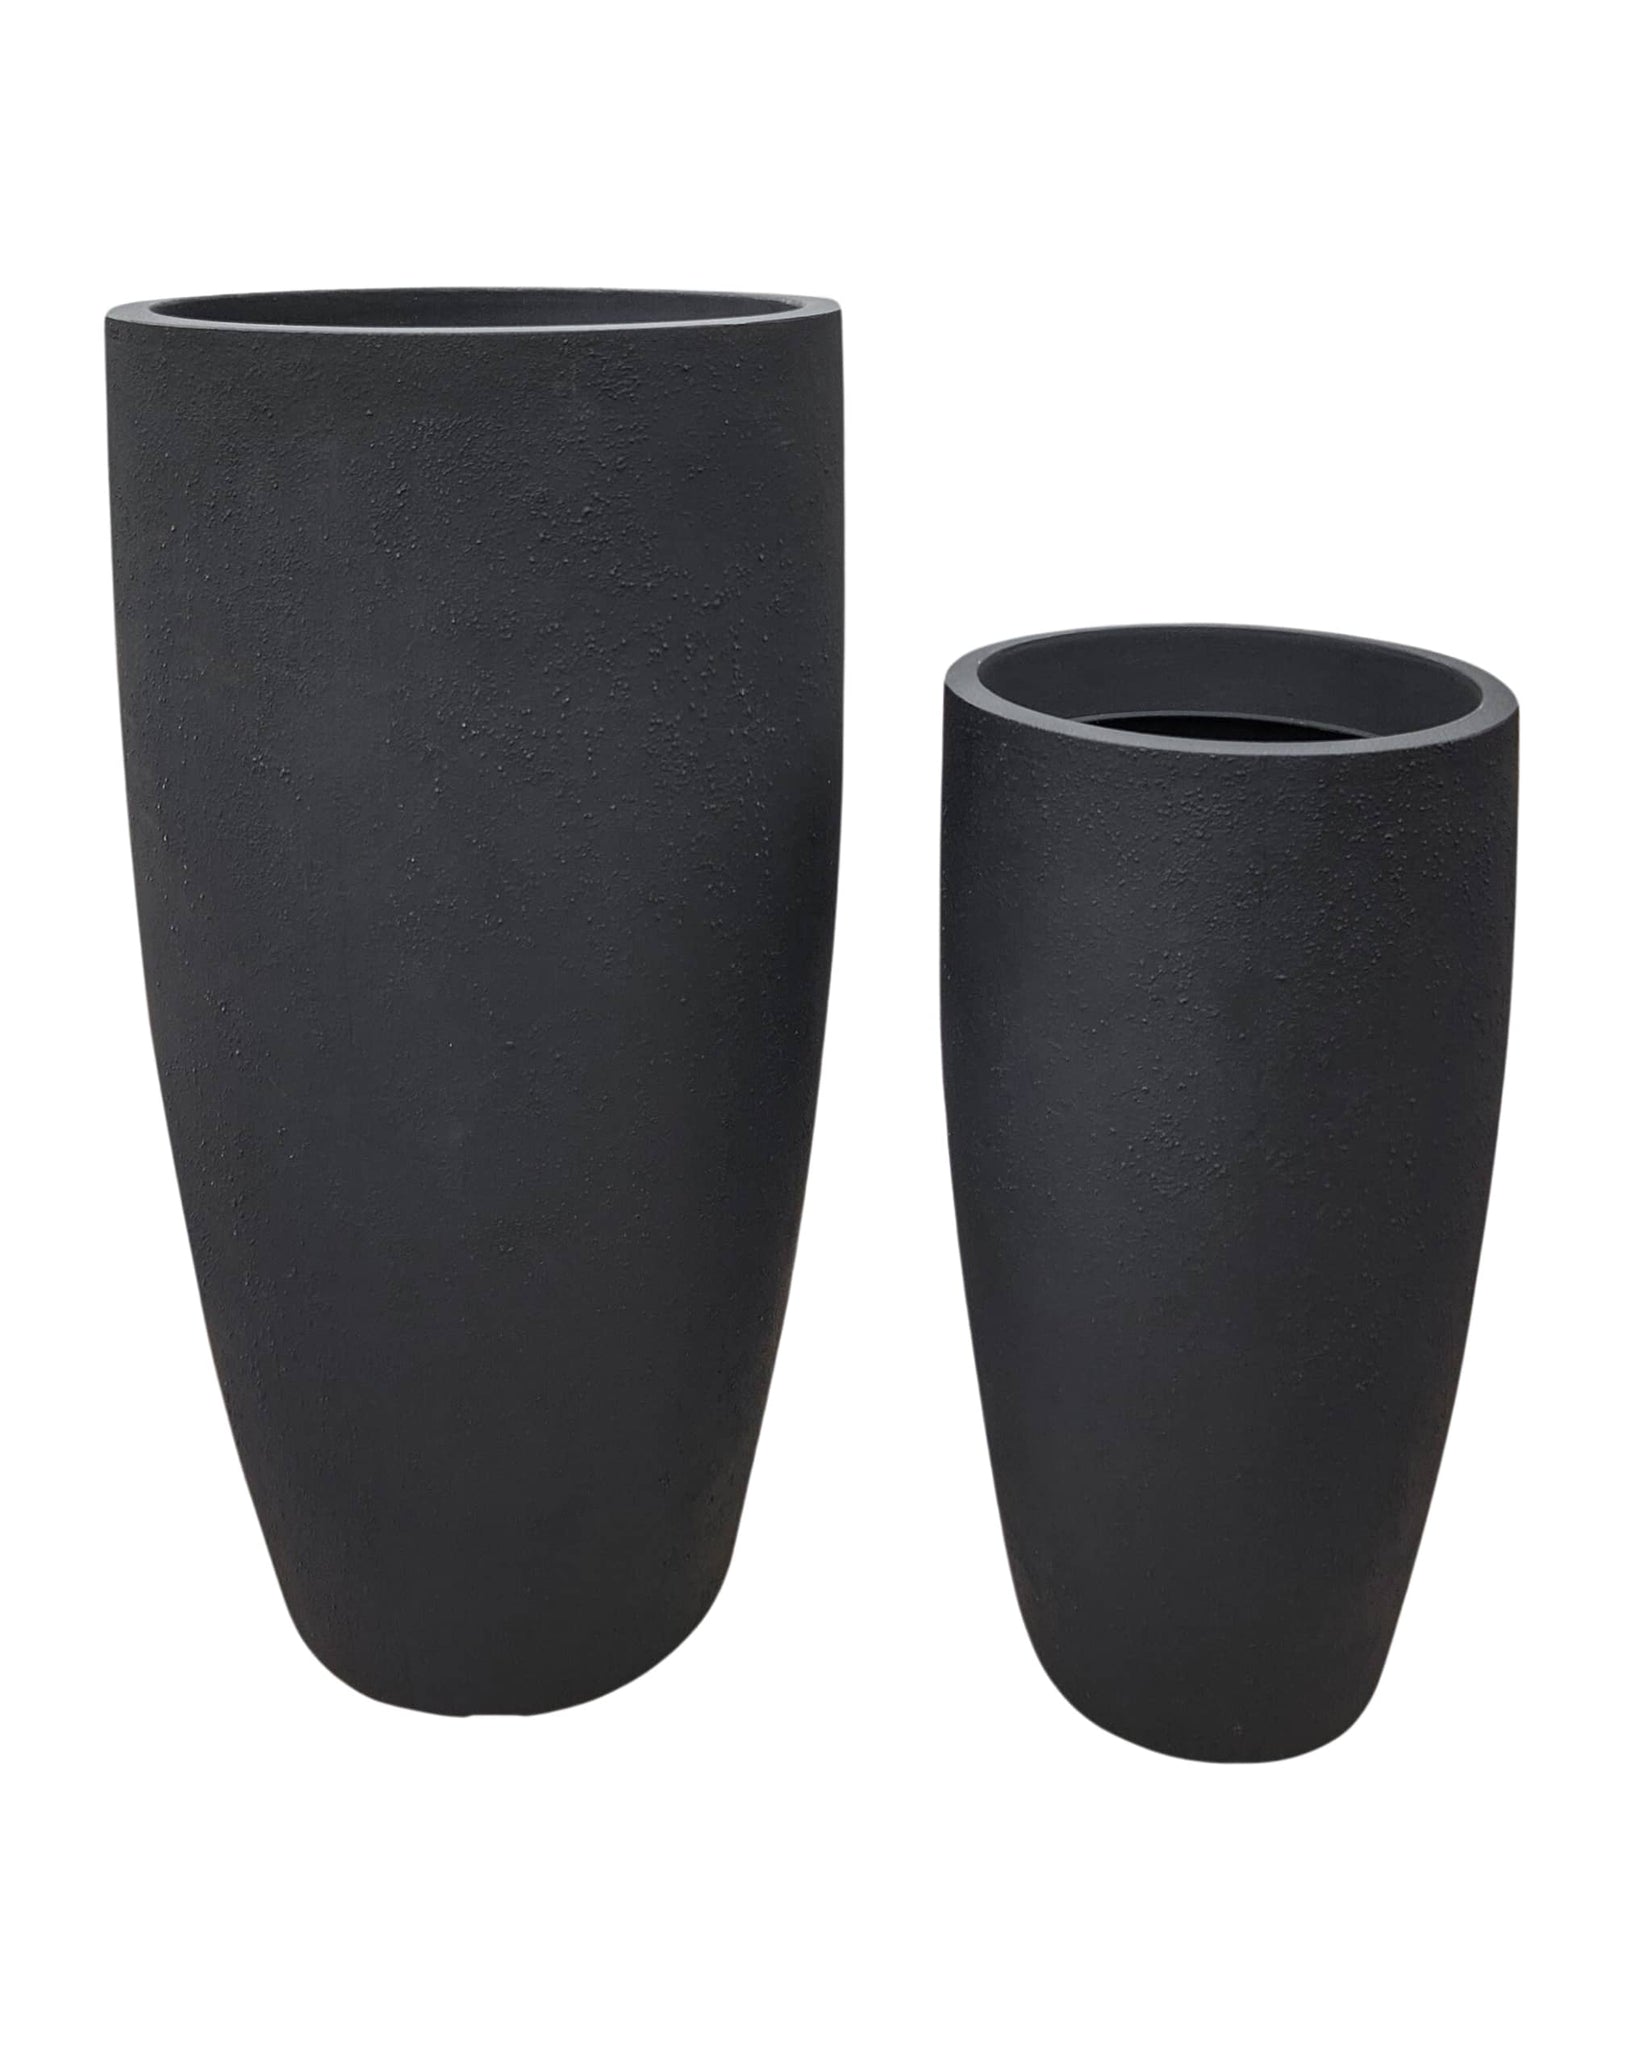 A slimline, modern statement planter by Japi that adds extra height and décor interest, bringing style into your architectural space. Textured finish. Florastyle by HIngham